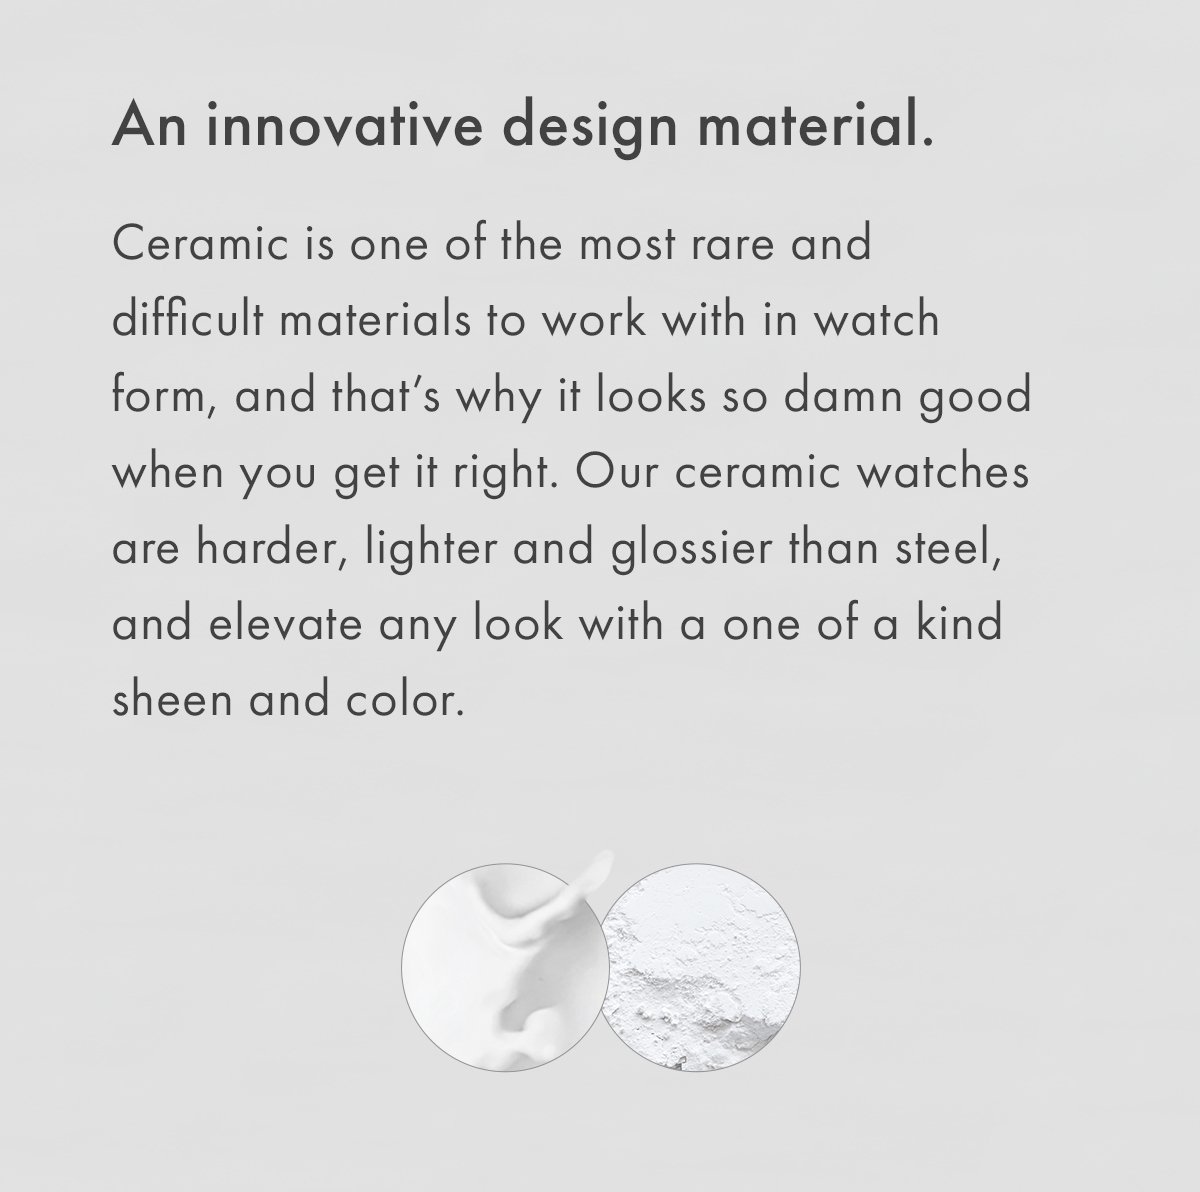 An innovative design material. Ceramic is one of the most rare and difficult materials to work with in watch form, and that's why it looks so damn good when you get it right. Our ceramic watches are harder, lighter and glossier than steel, and elevate any look with a one of a kind sheen and color.